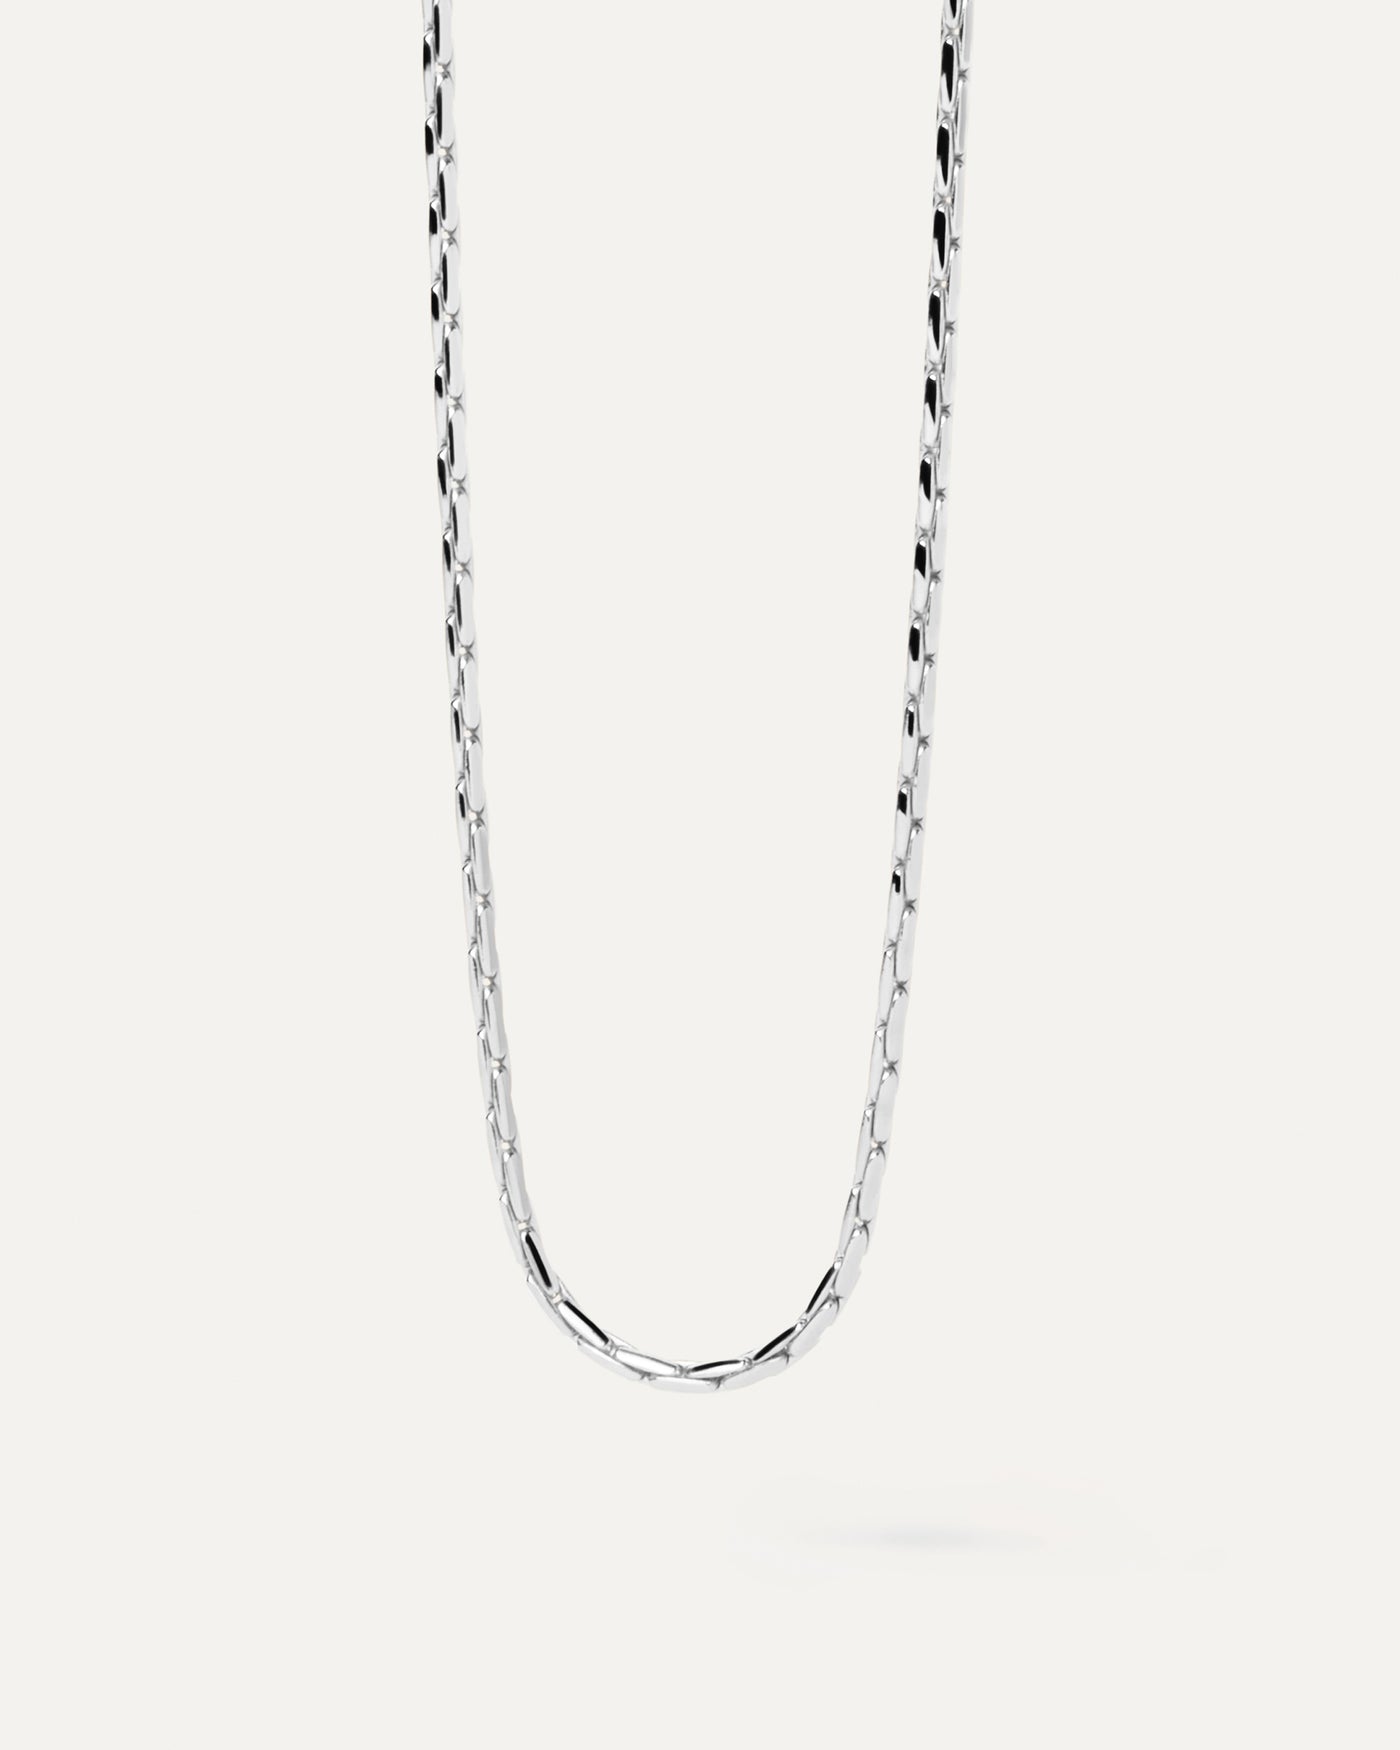 2023 Selection | Boston Silver Chain Necklace. Boston silver thick chain necklace with elongated links. Get the latest arrival from PDPAOLA. Place your order safely and get this Best Seller. Free Shipping.